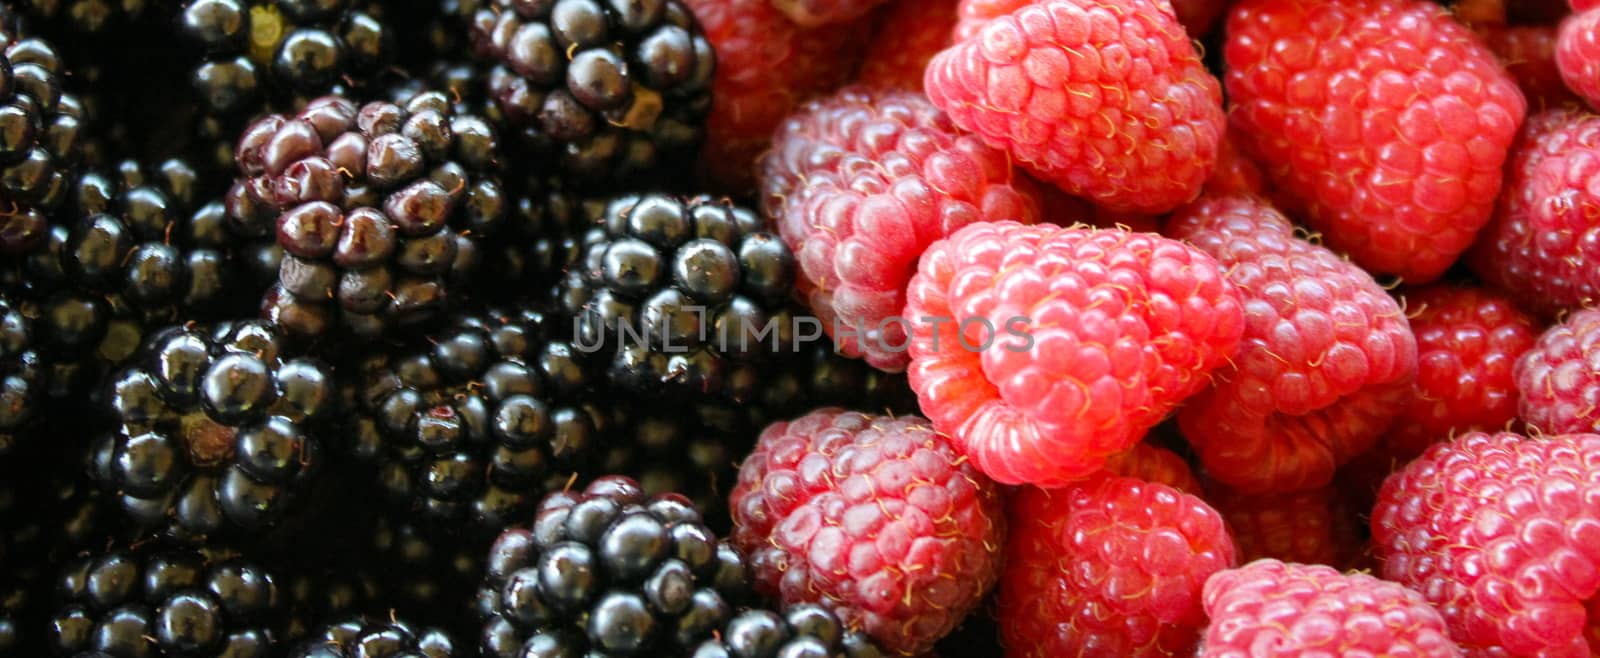 Banner of blackberries and raspberries. On the left side blackberries and on the right side raspberries. by mahirrov